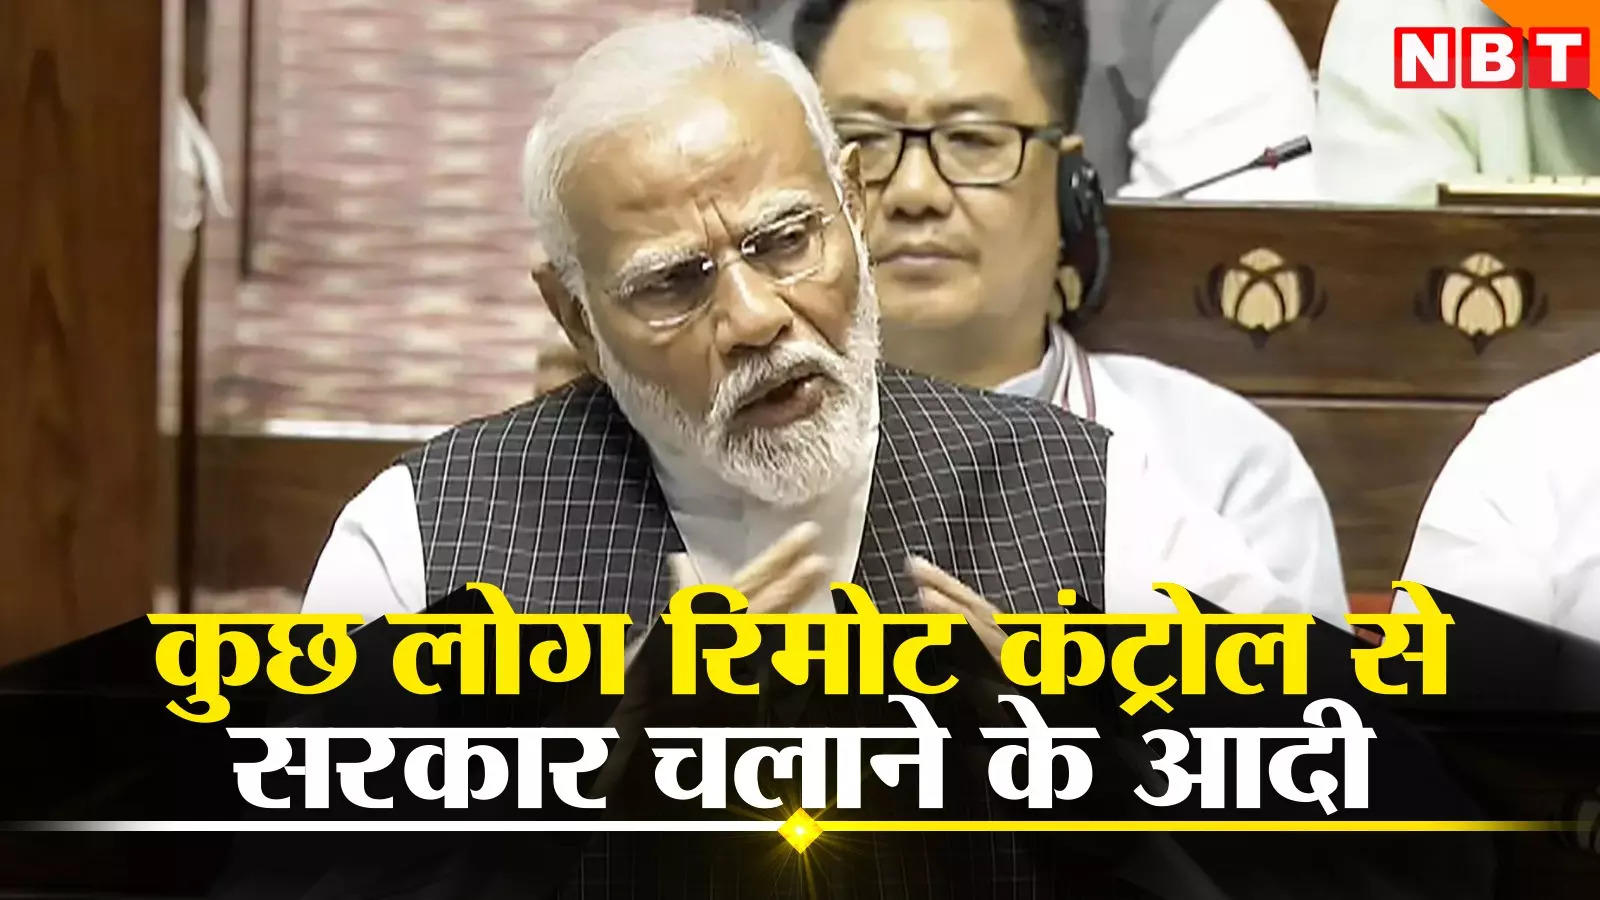 Modi took a dig at Sonia Gandhi by referring to 'remote control', on which issue did the opposition MPs walk out?